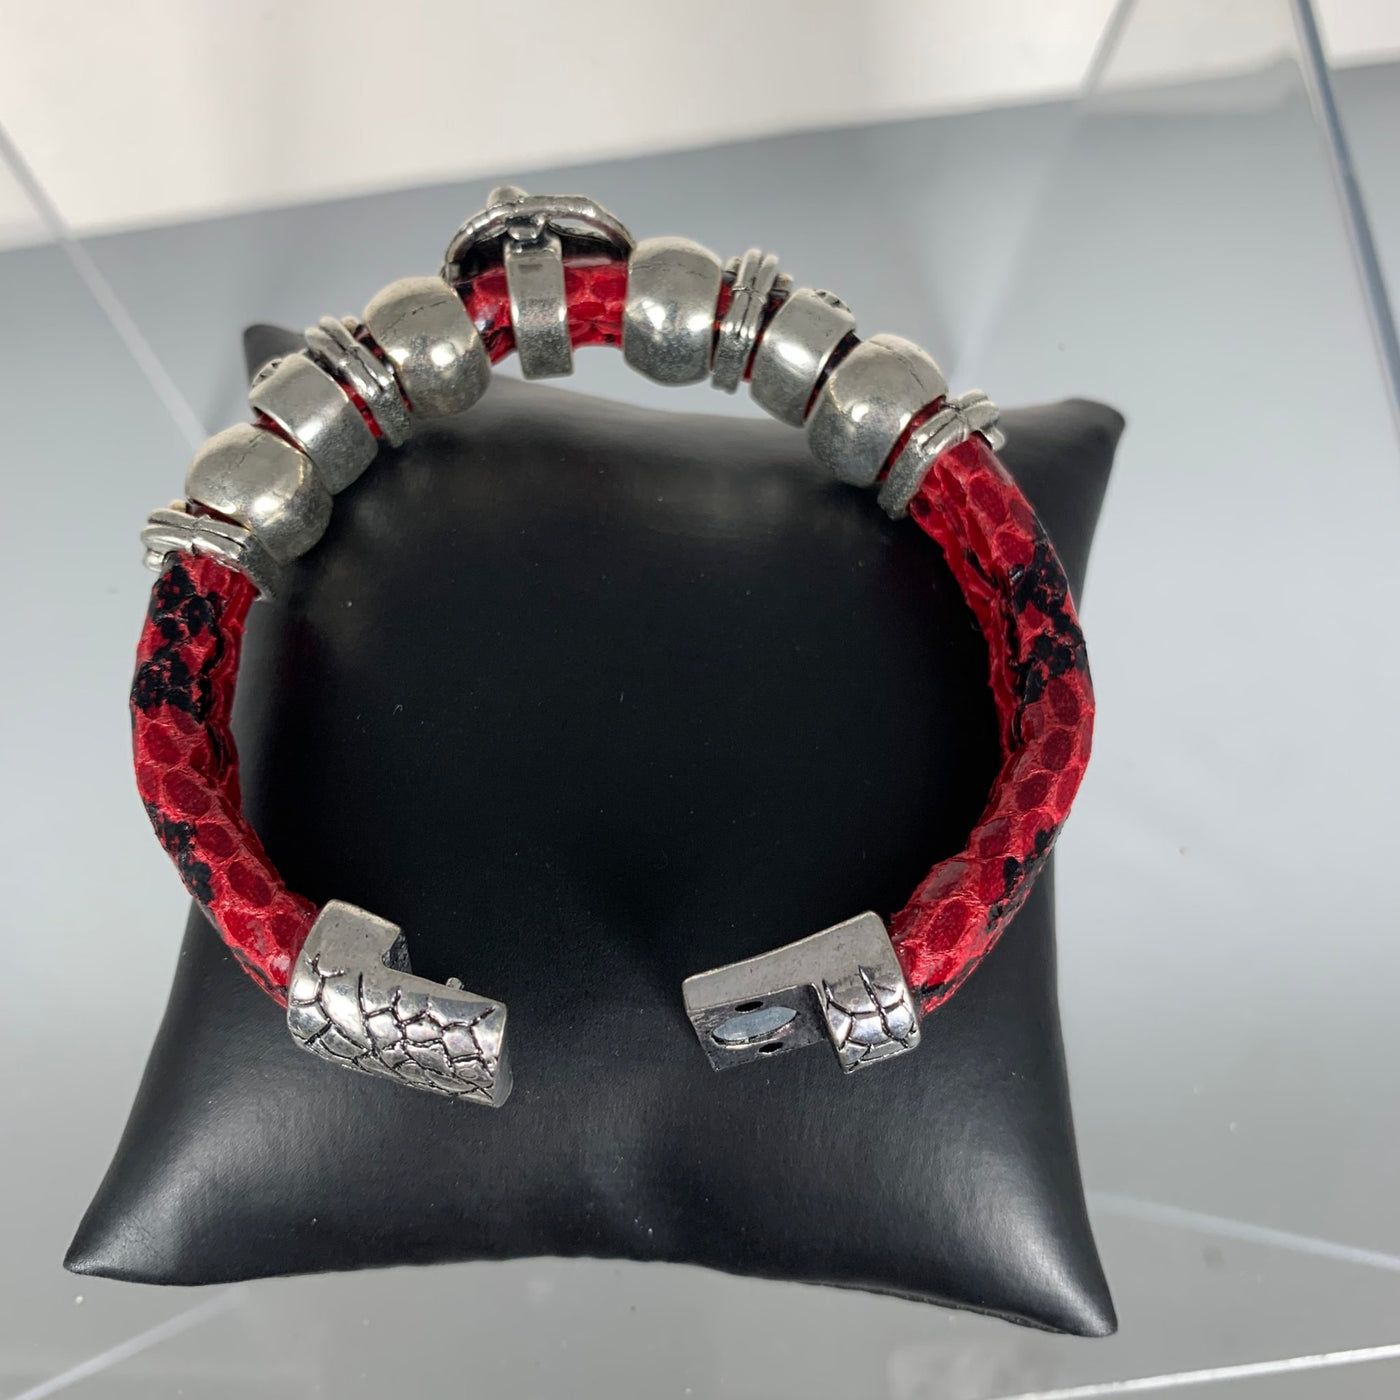 Red Faux Snake Skin Band Bracelet Featuring a Bird